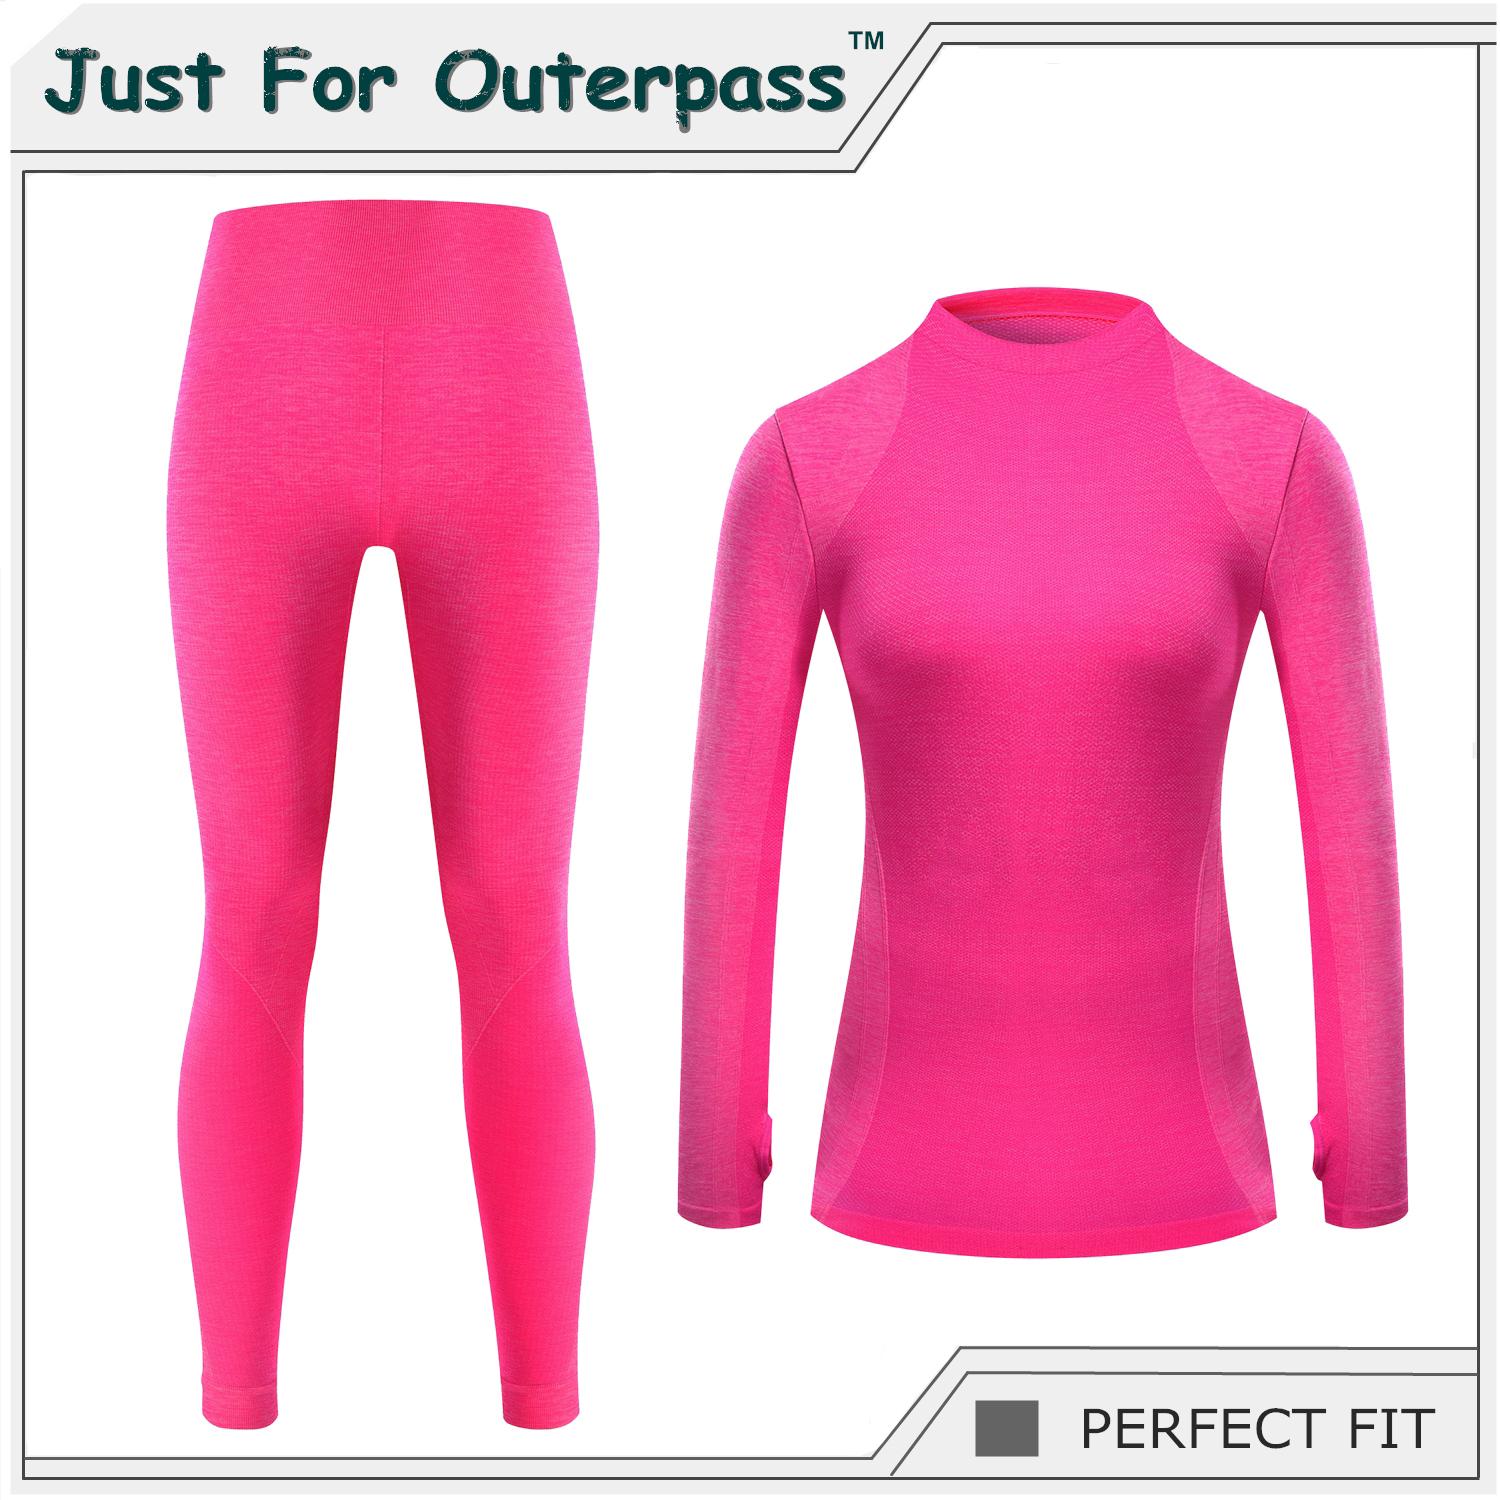 Just For Outerpass Brand Winter Thermal Underwear Women Elastic Breathable Female HI-Q Casual Warm Long Johns Set: Rose Red Set / L